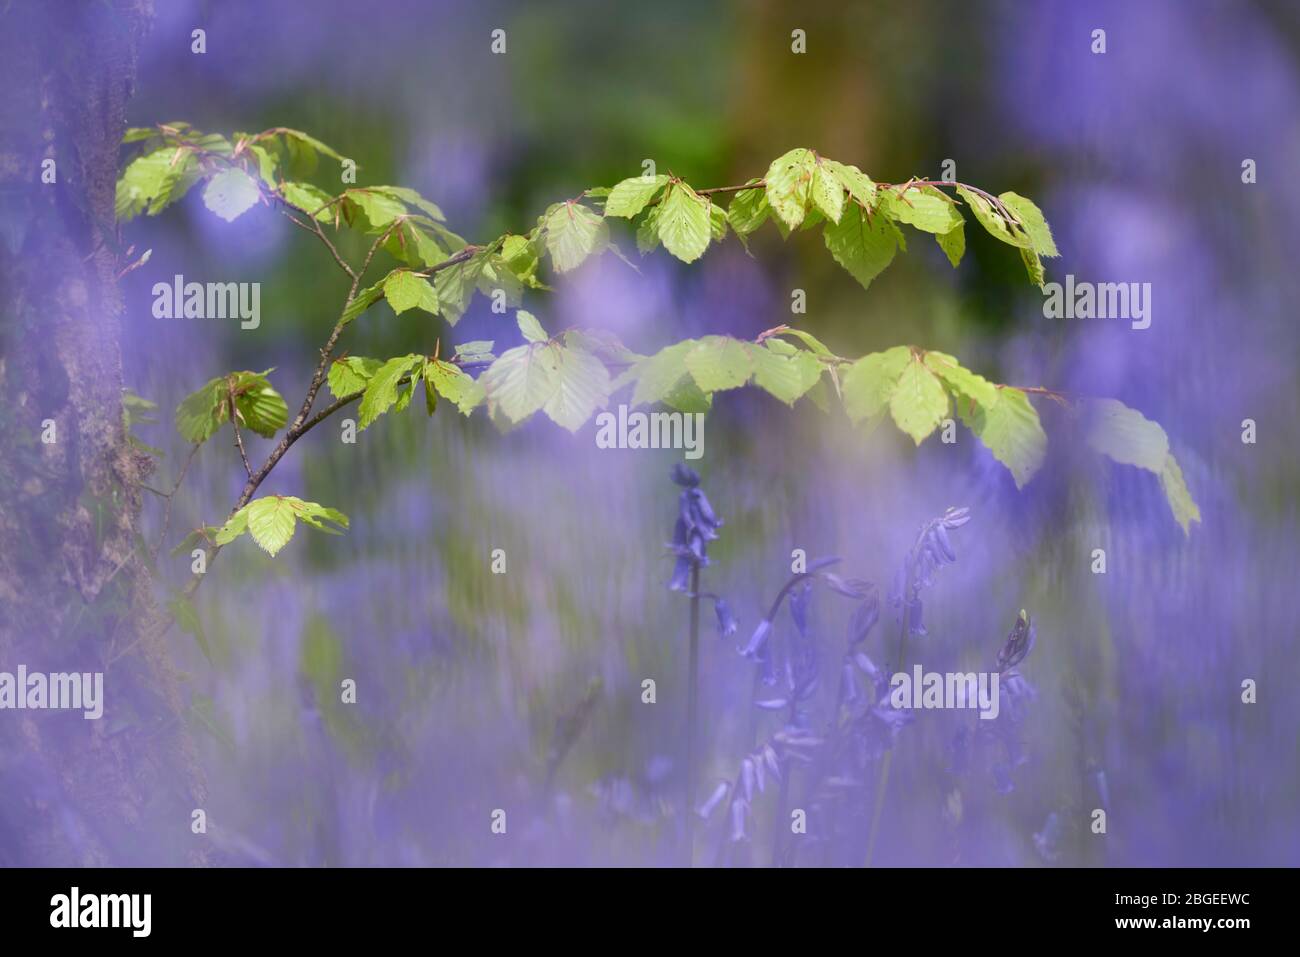 Close-up view of new beech tree leaves amongst bluebells Stock Photo